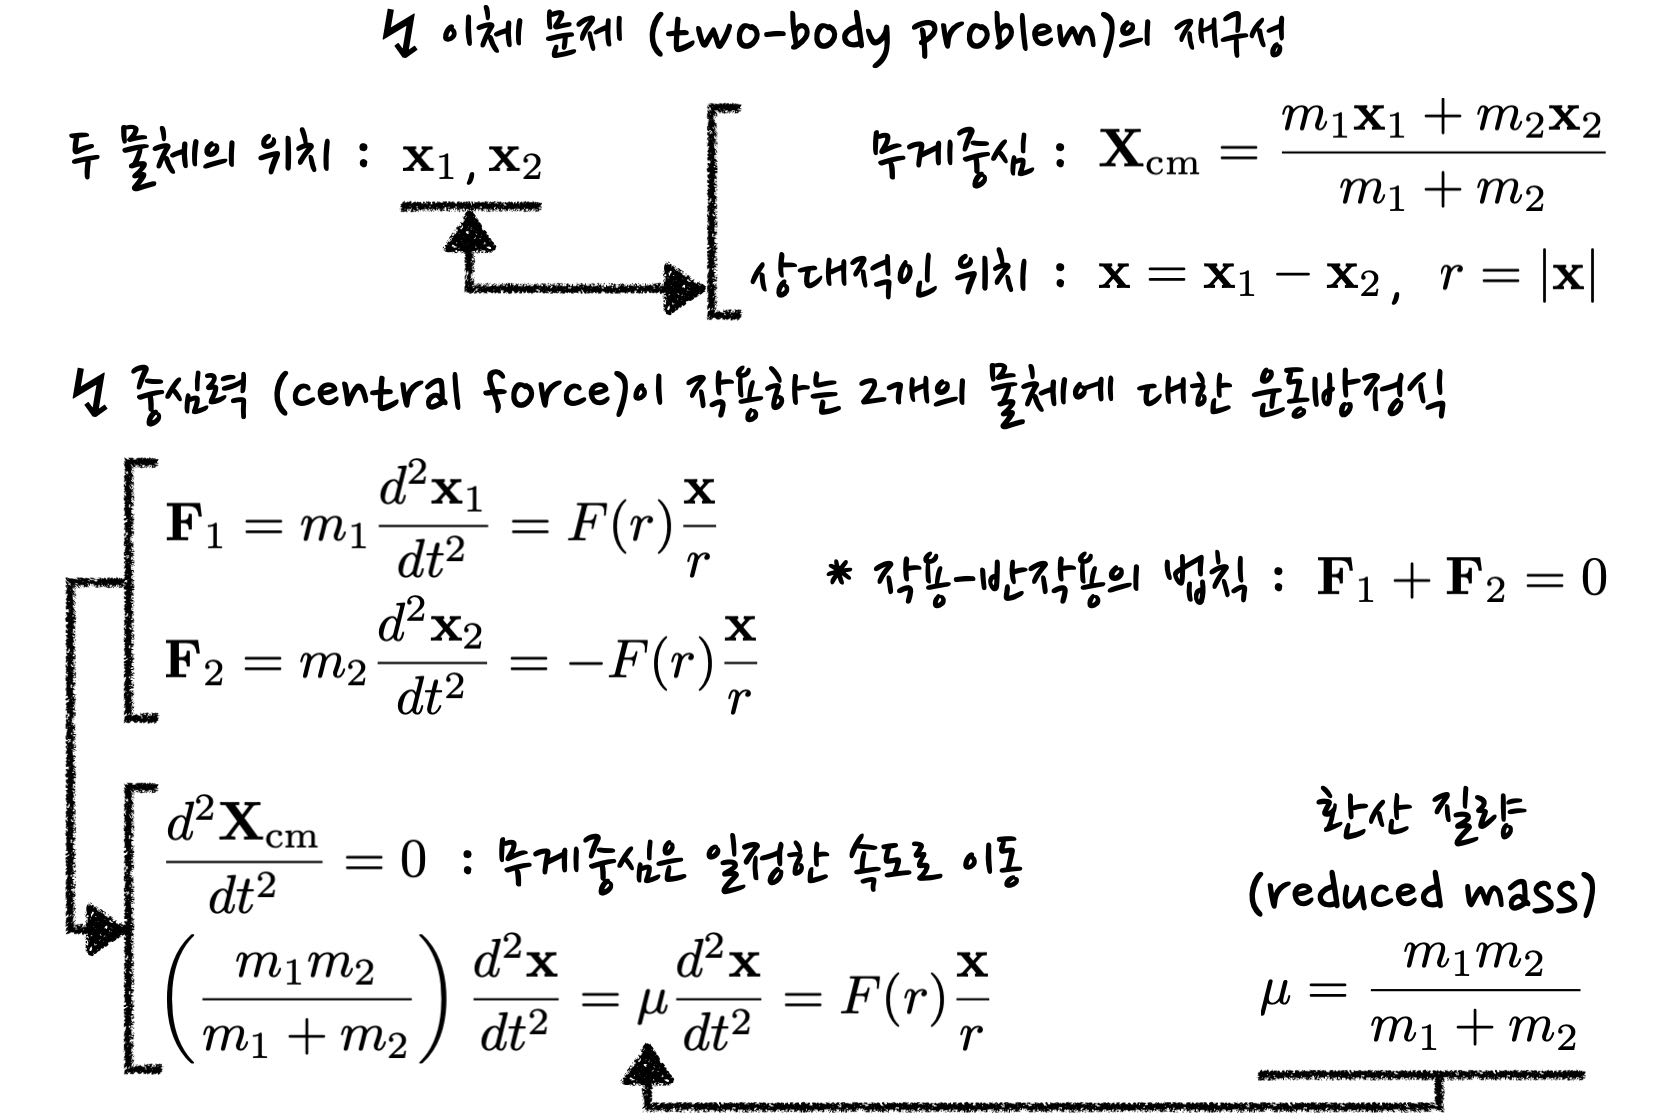 schematics of two-body problem with central force&#44; where the equations of motion is rewritten in terms of the center of mass and relative position. The formula for reduced mass is also derived.